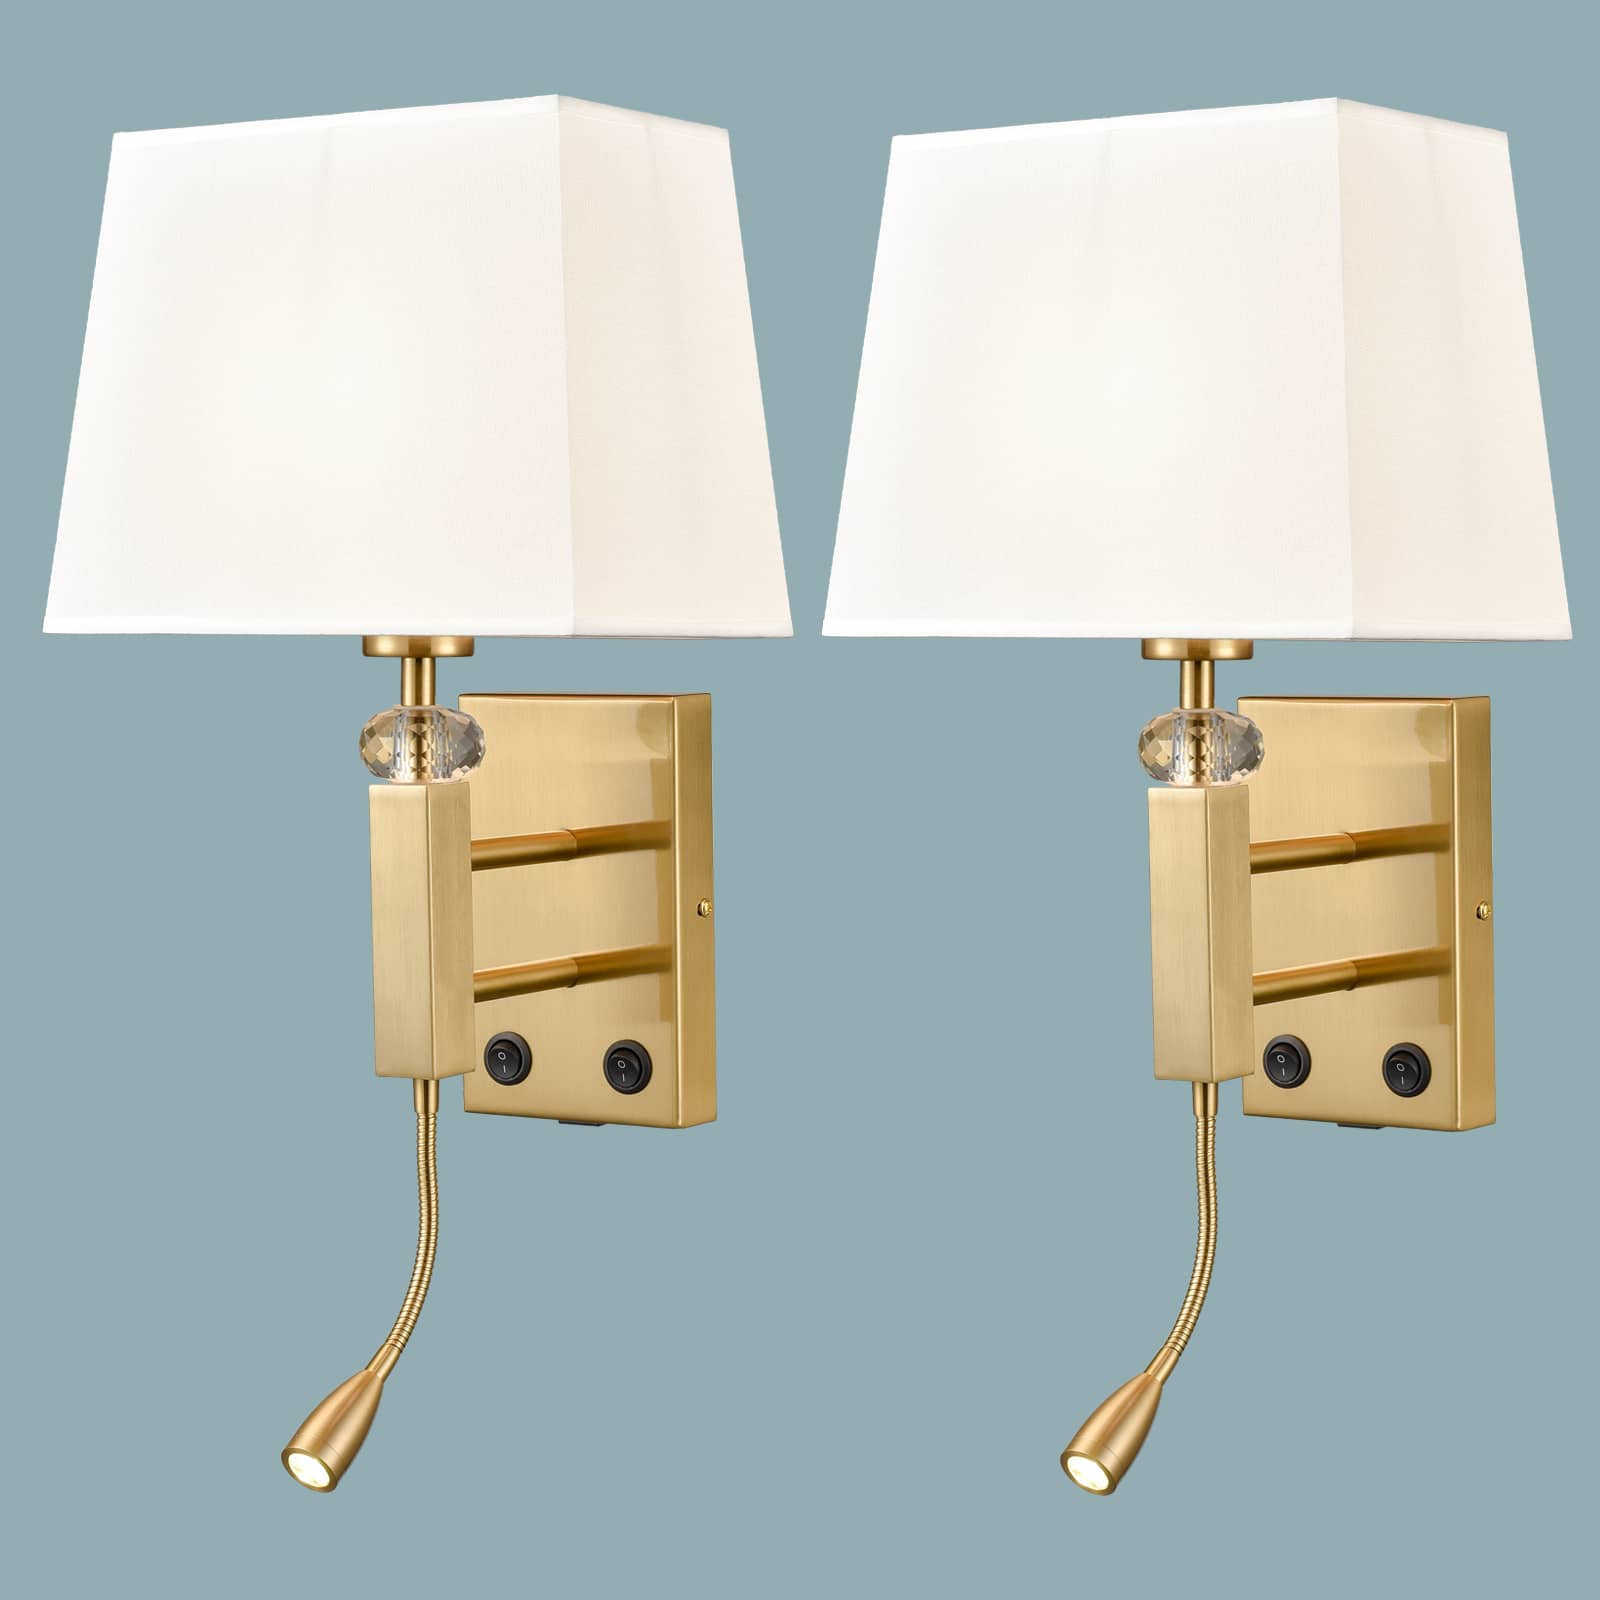 Set of 2 Modern Brass Gold with White Fabric Wall Sconces with USB Charging Port|Twin on/off Switch|LED Reading Light for bedroom